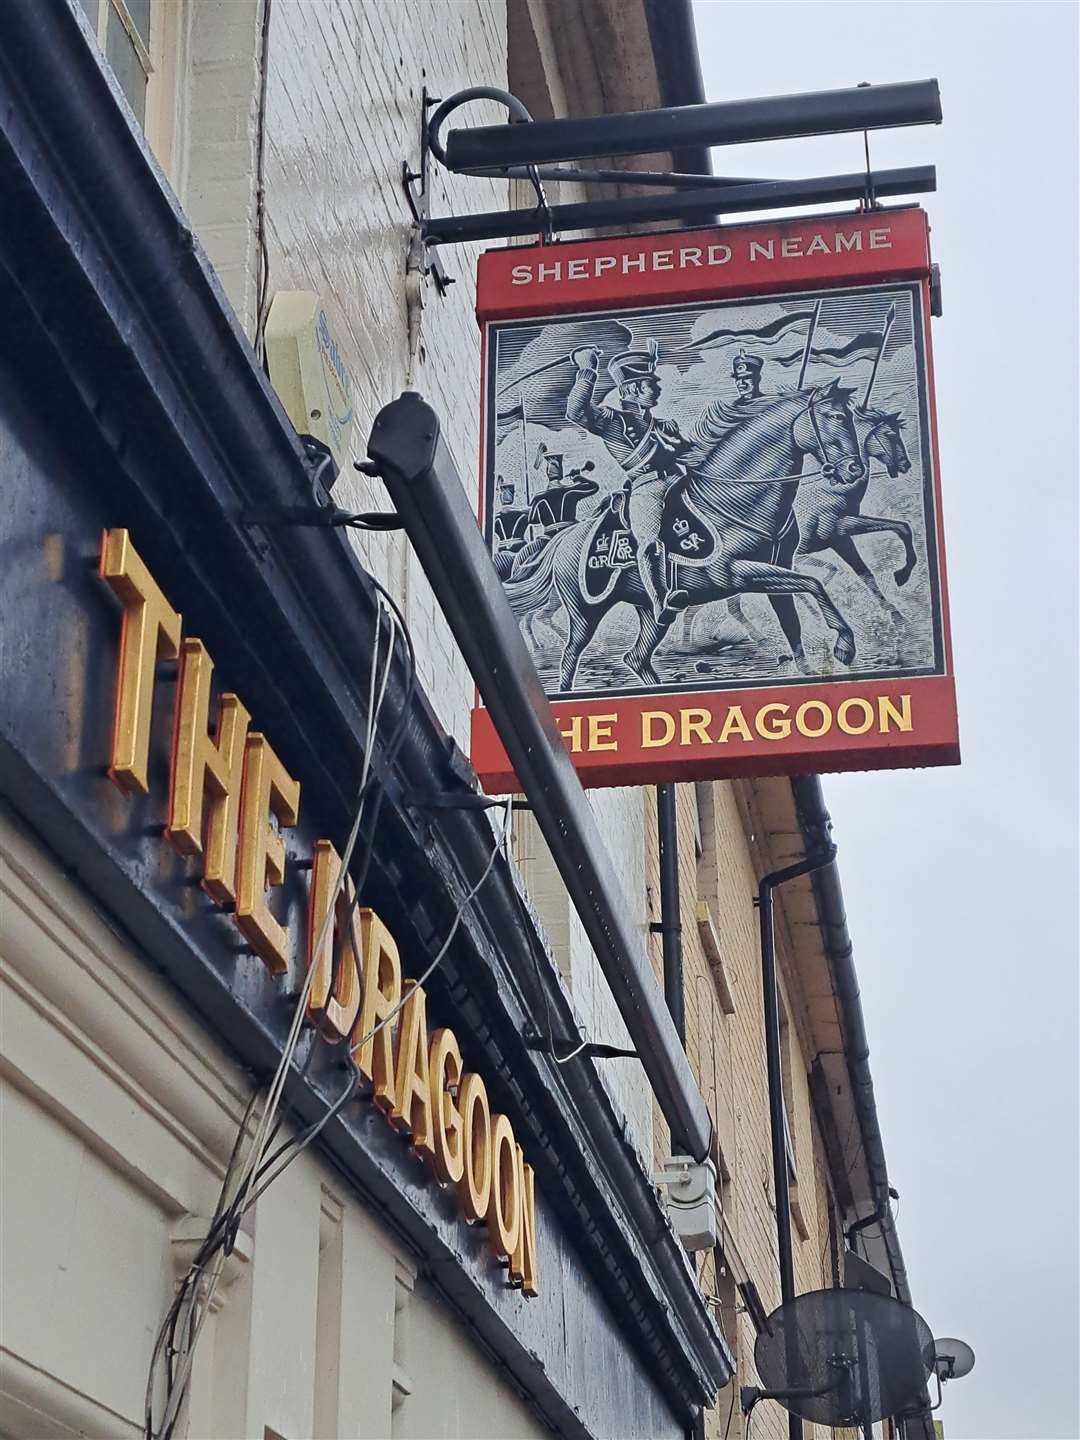 The pub's has been sold